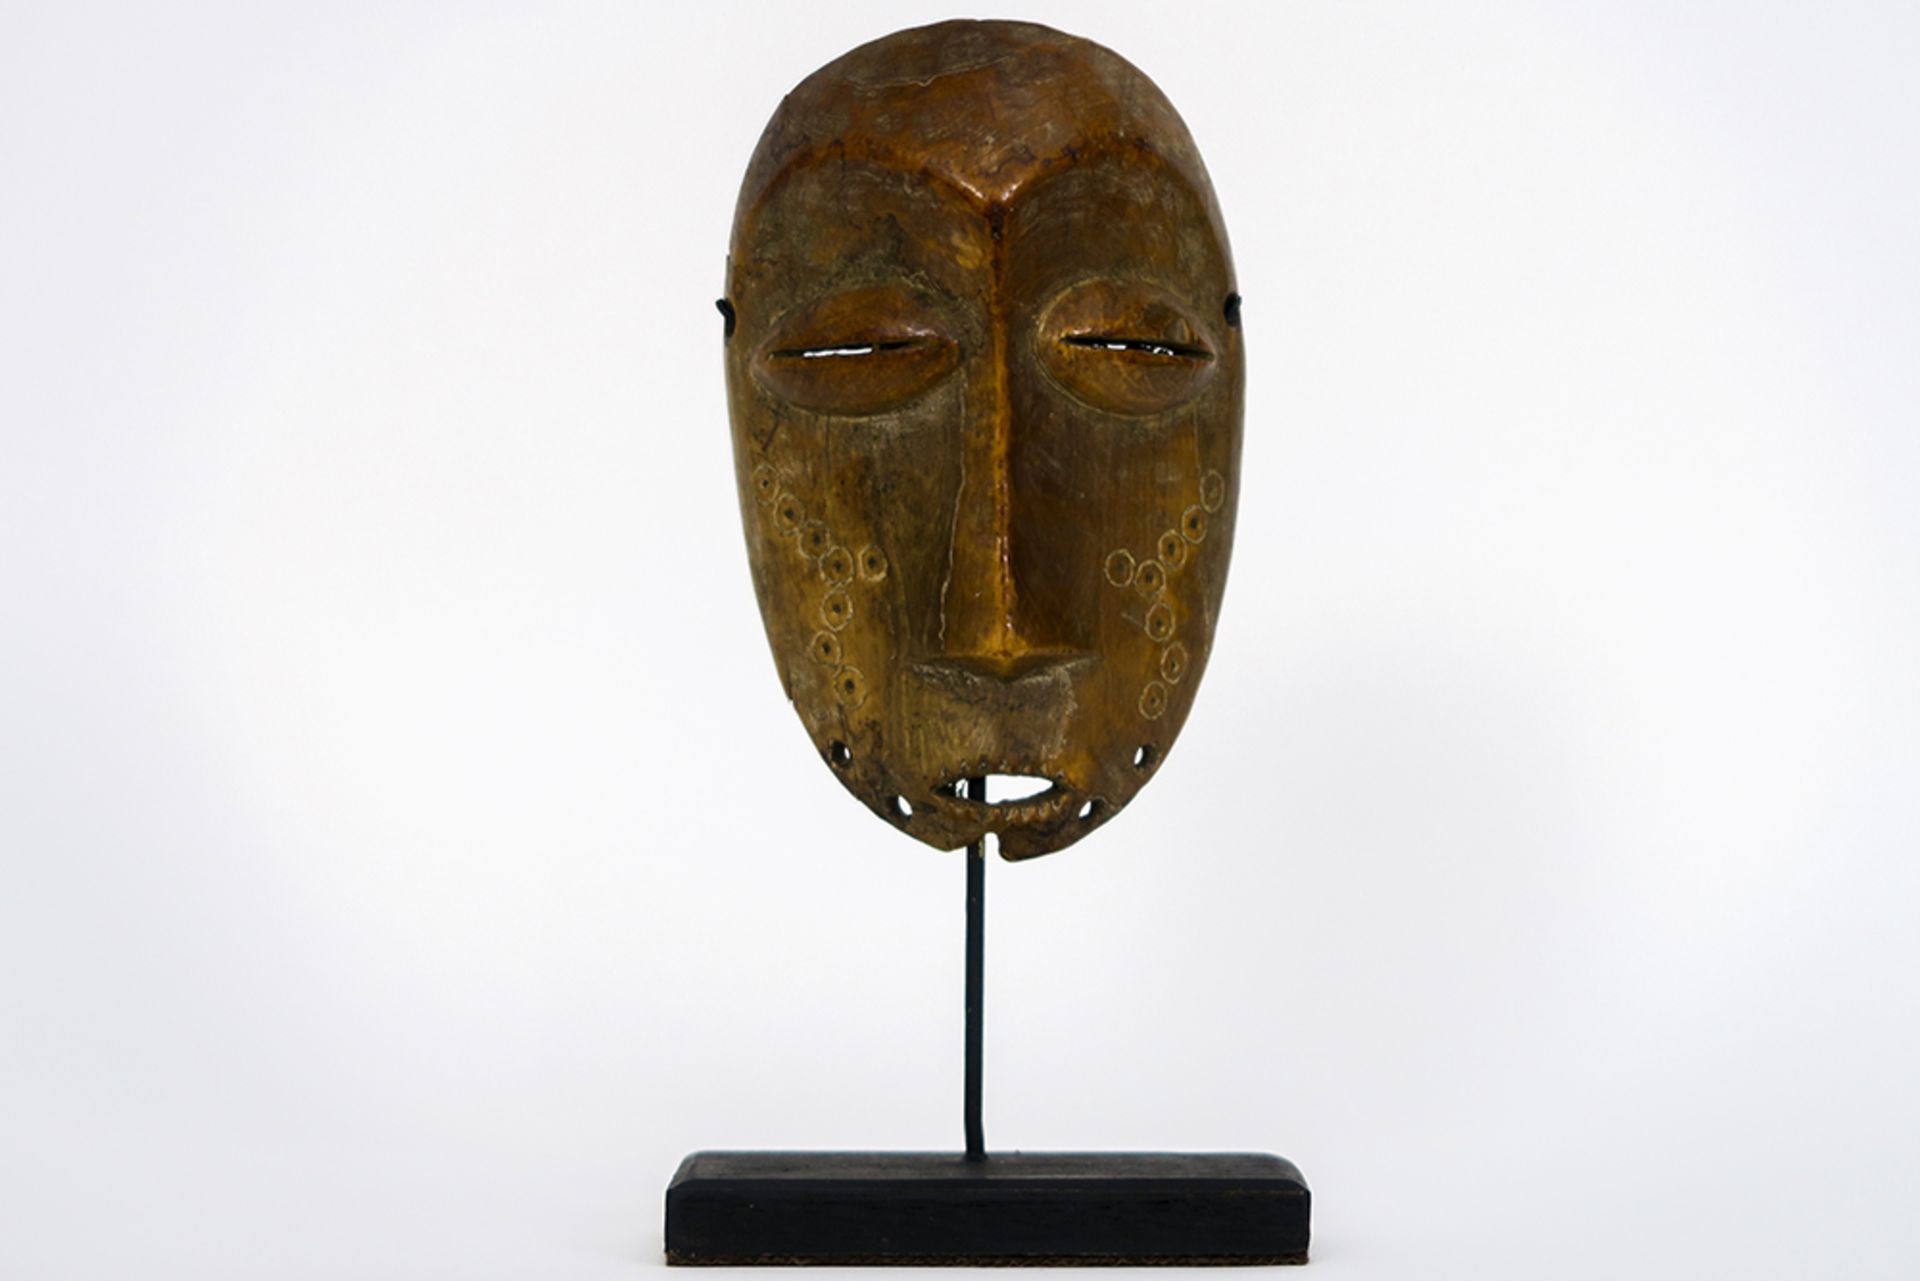 1st half of the 20th Cent. African Congolese "Lega" mask in ivory || AFRIKA - KONGO - 1° HELFT 20°